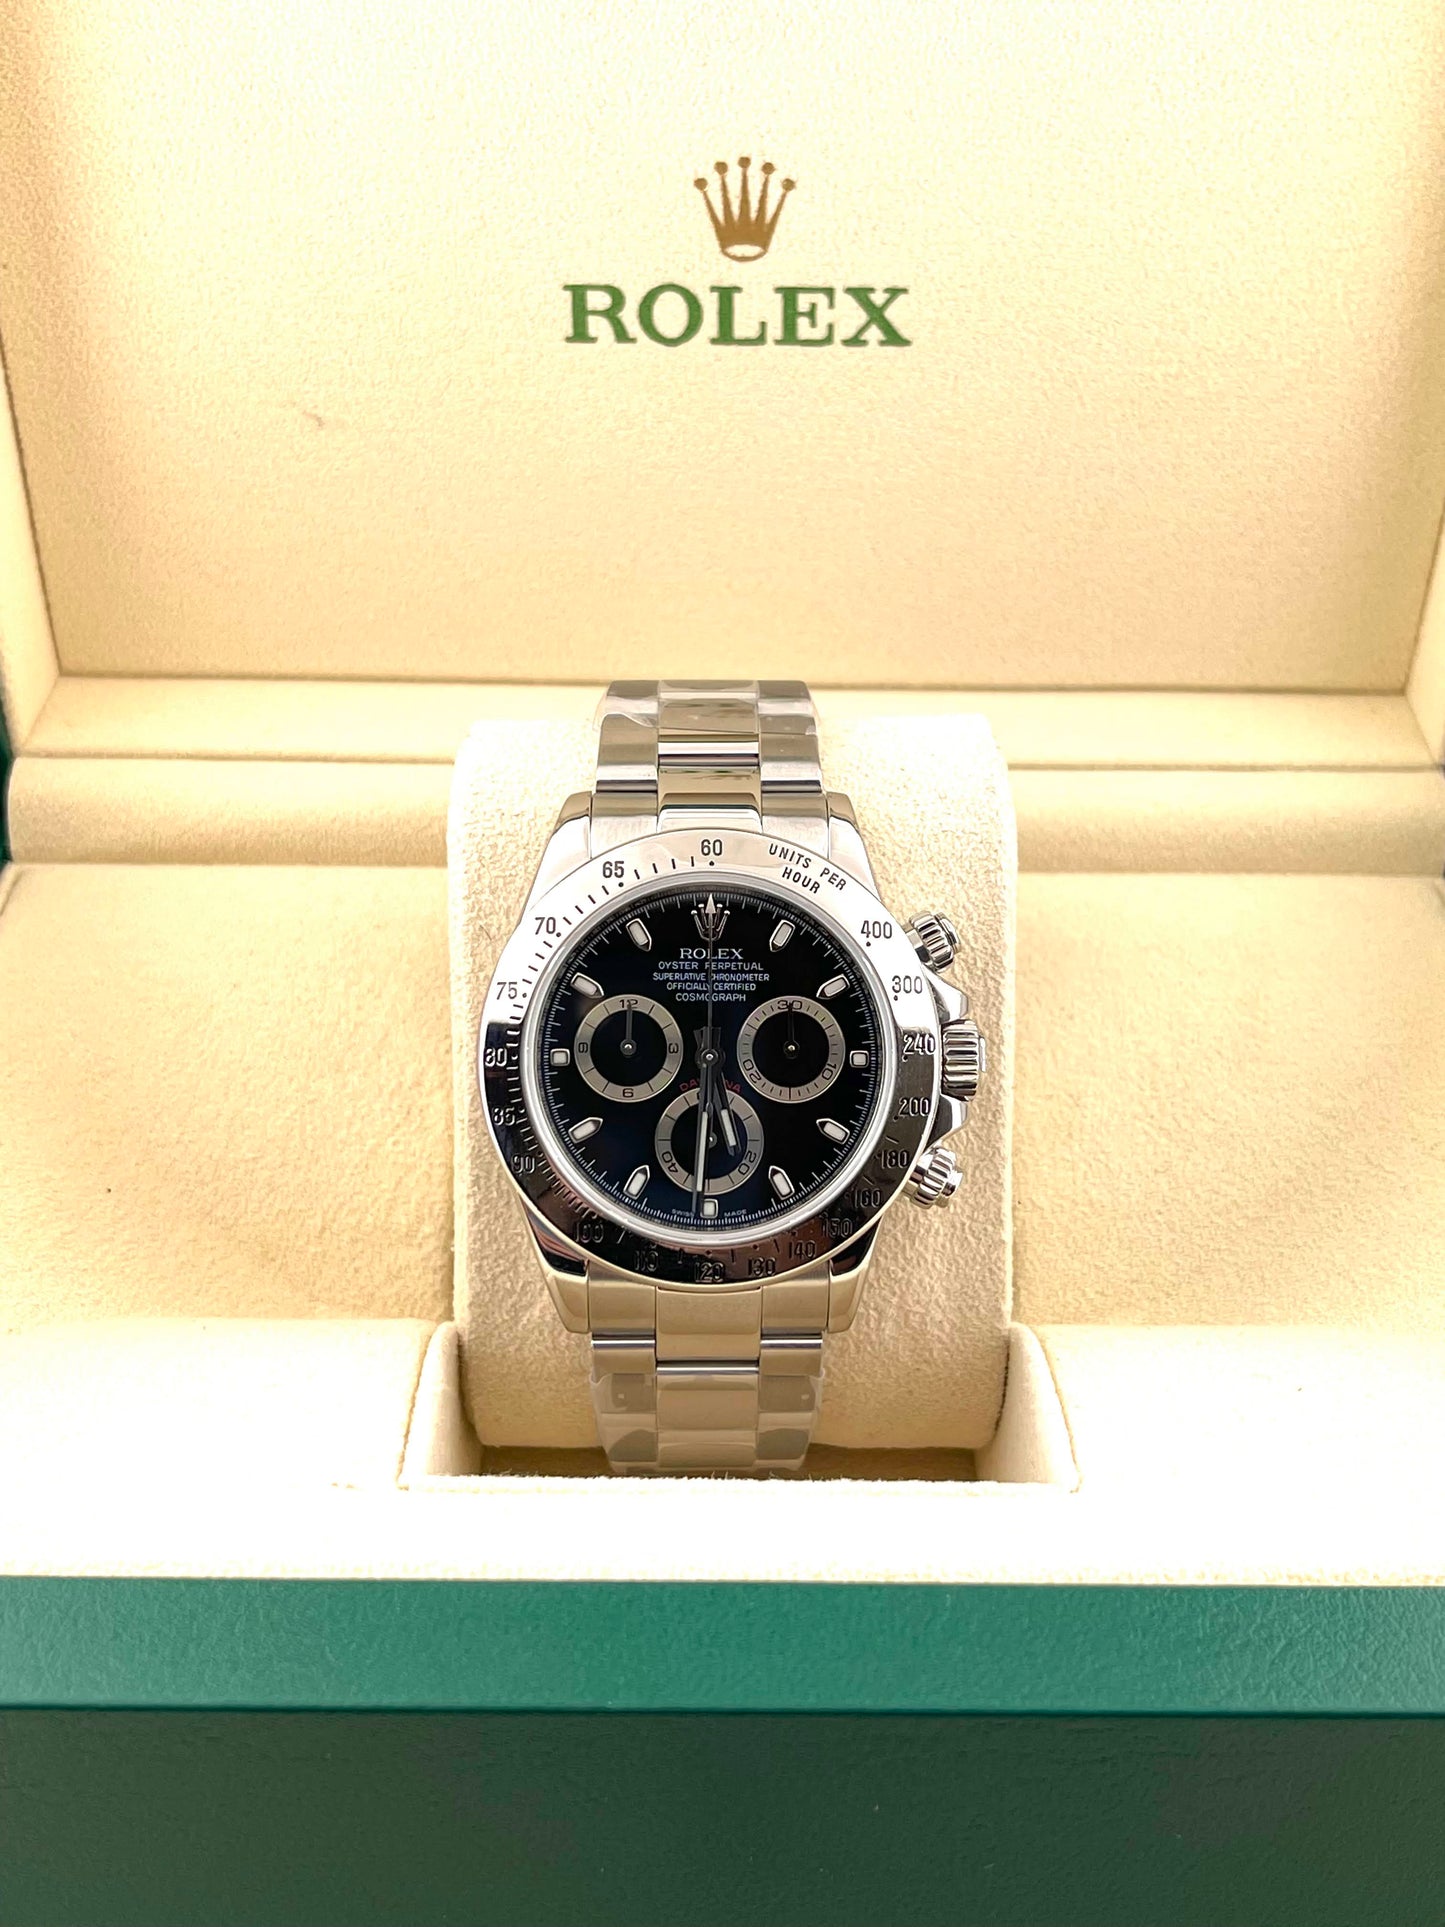 2007 Rolex Daytona Cosmograph 116520 Black Dial Stainless Steel No Papers 40mm